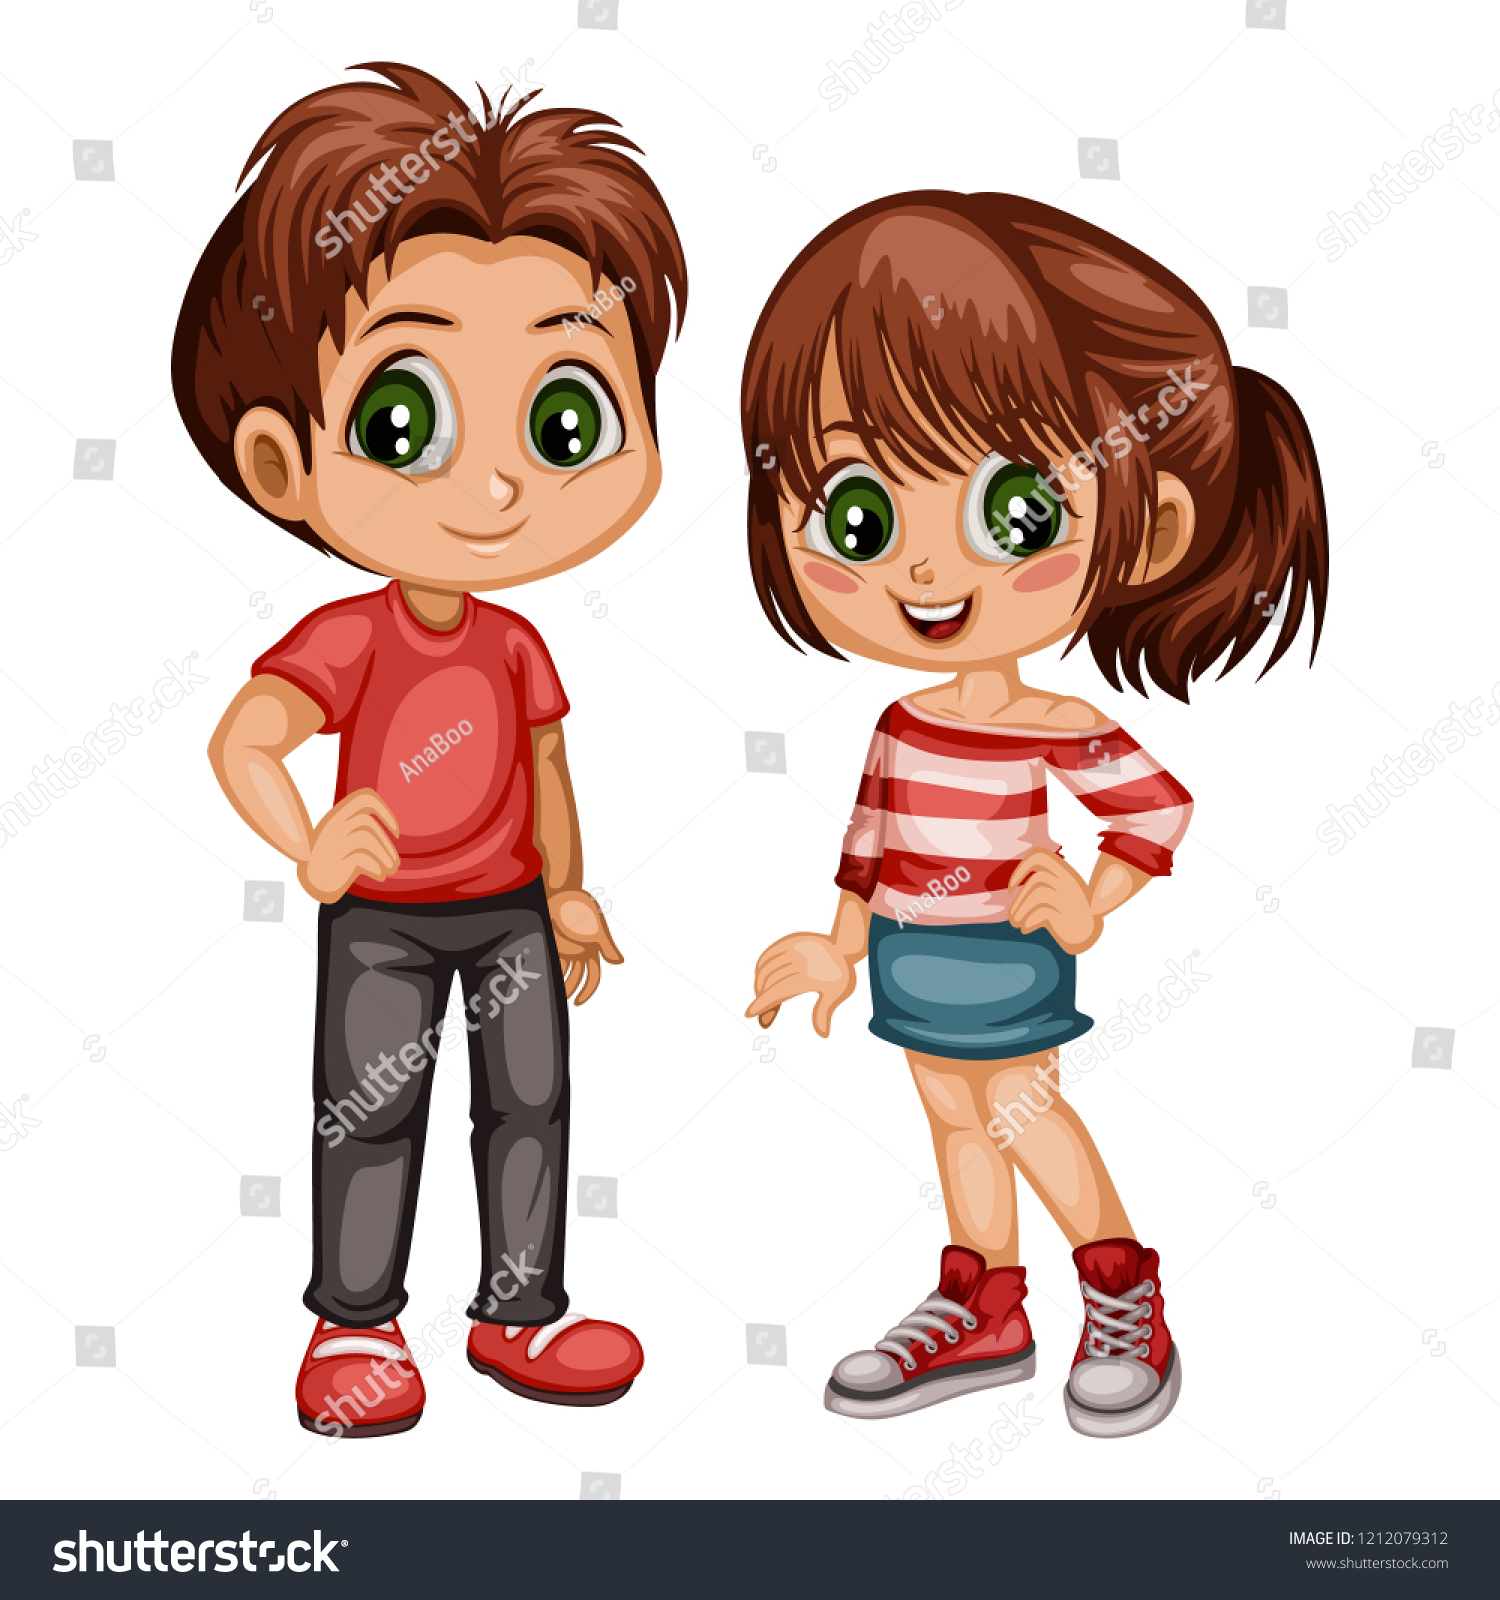 boy and girl images